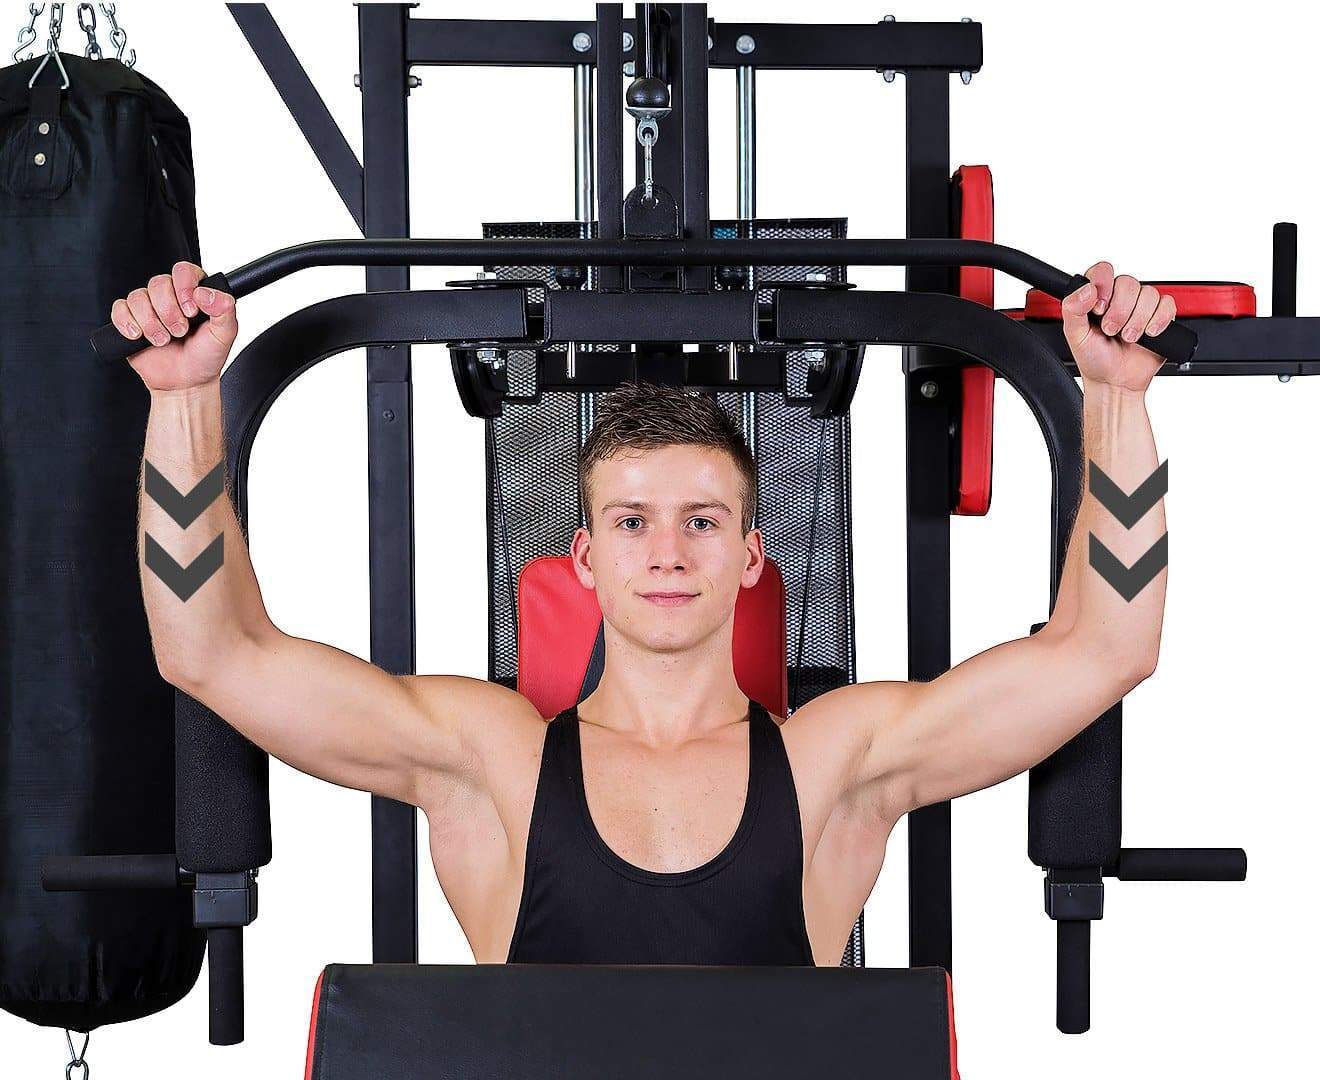 Fatherday-sports and fitness Powertrain Multi-Station Home Gym with Punching Bag - 165lbs